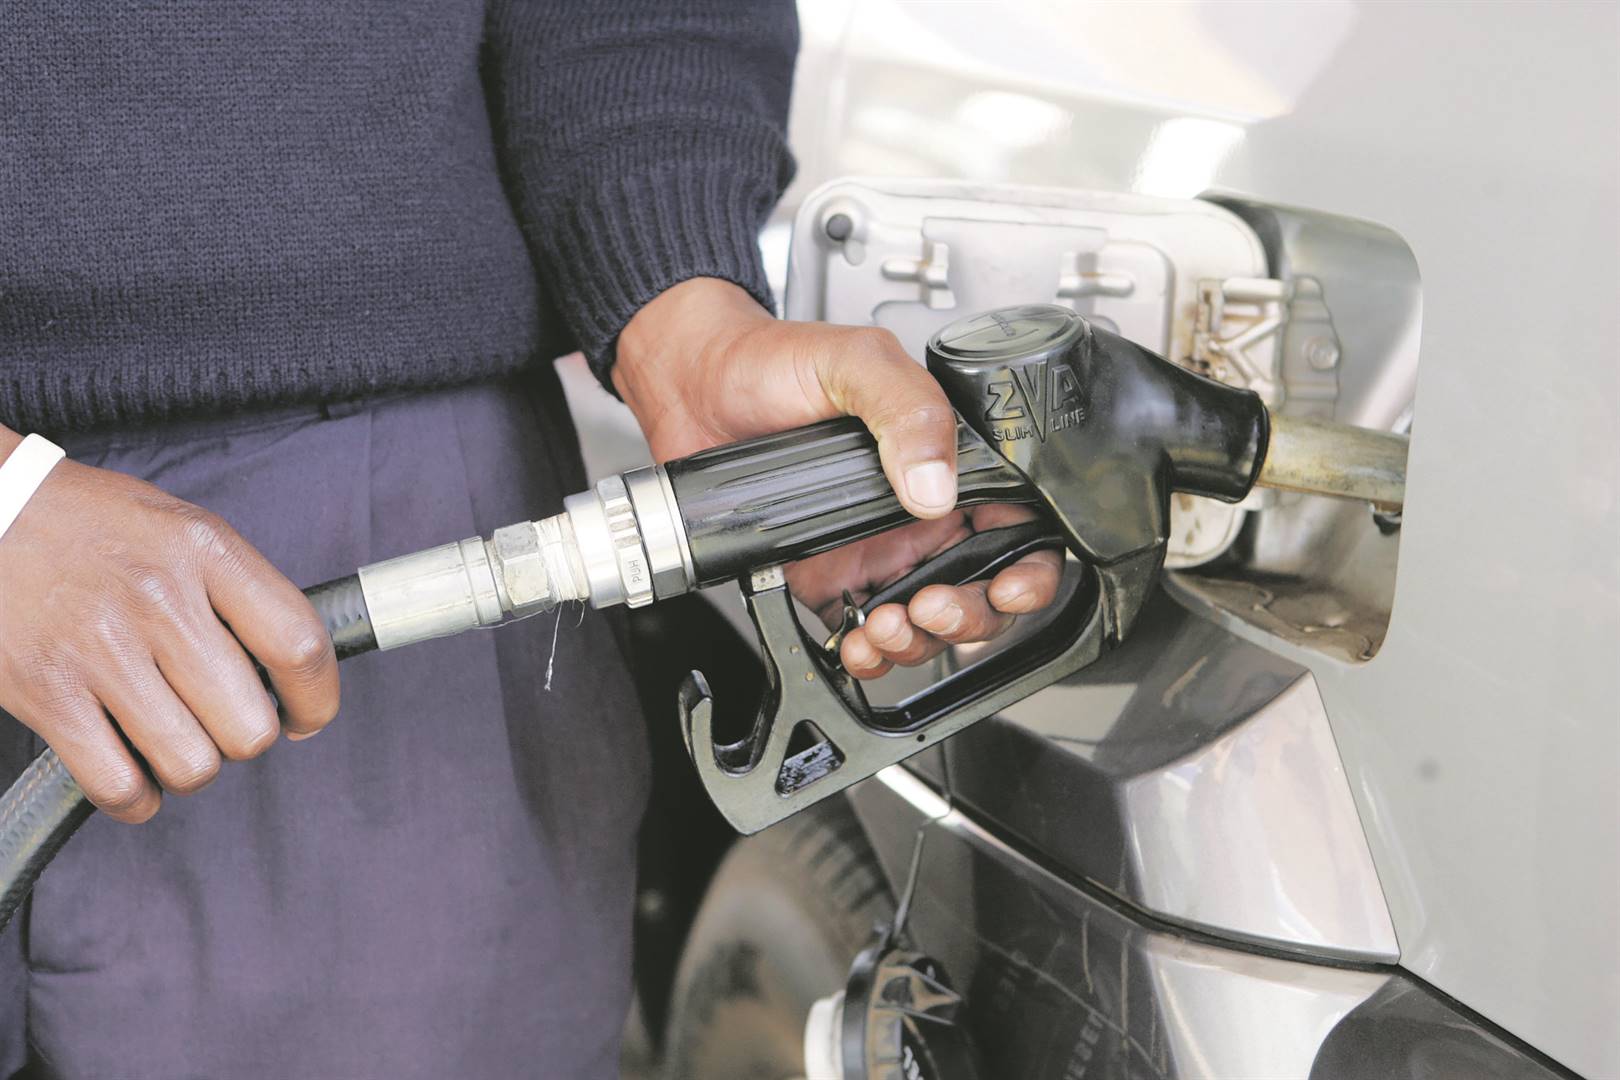 Petrol stations across Gauteng are struggling to fill customers’ tanks on hot days.